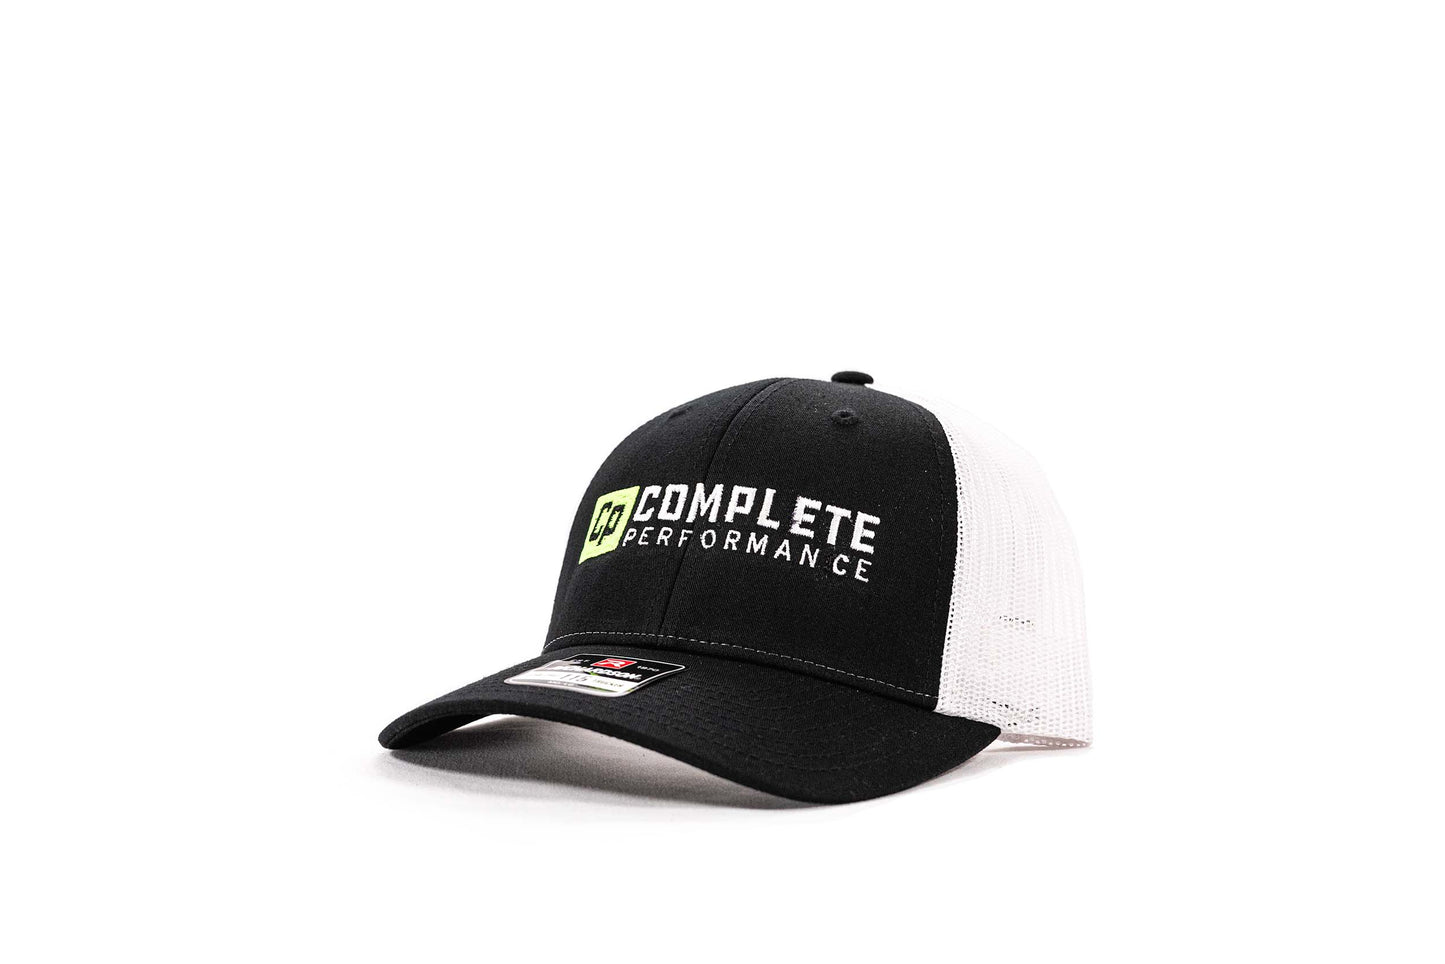 Complete Performance Hat